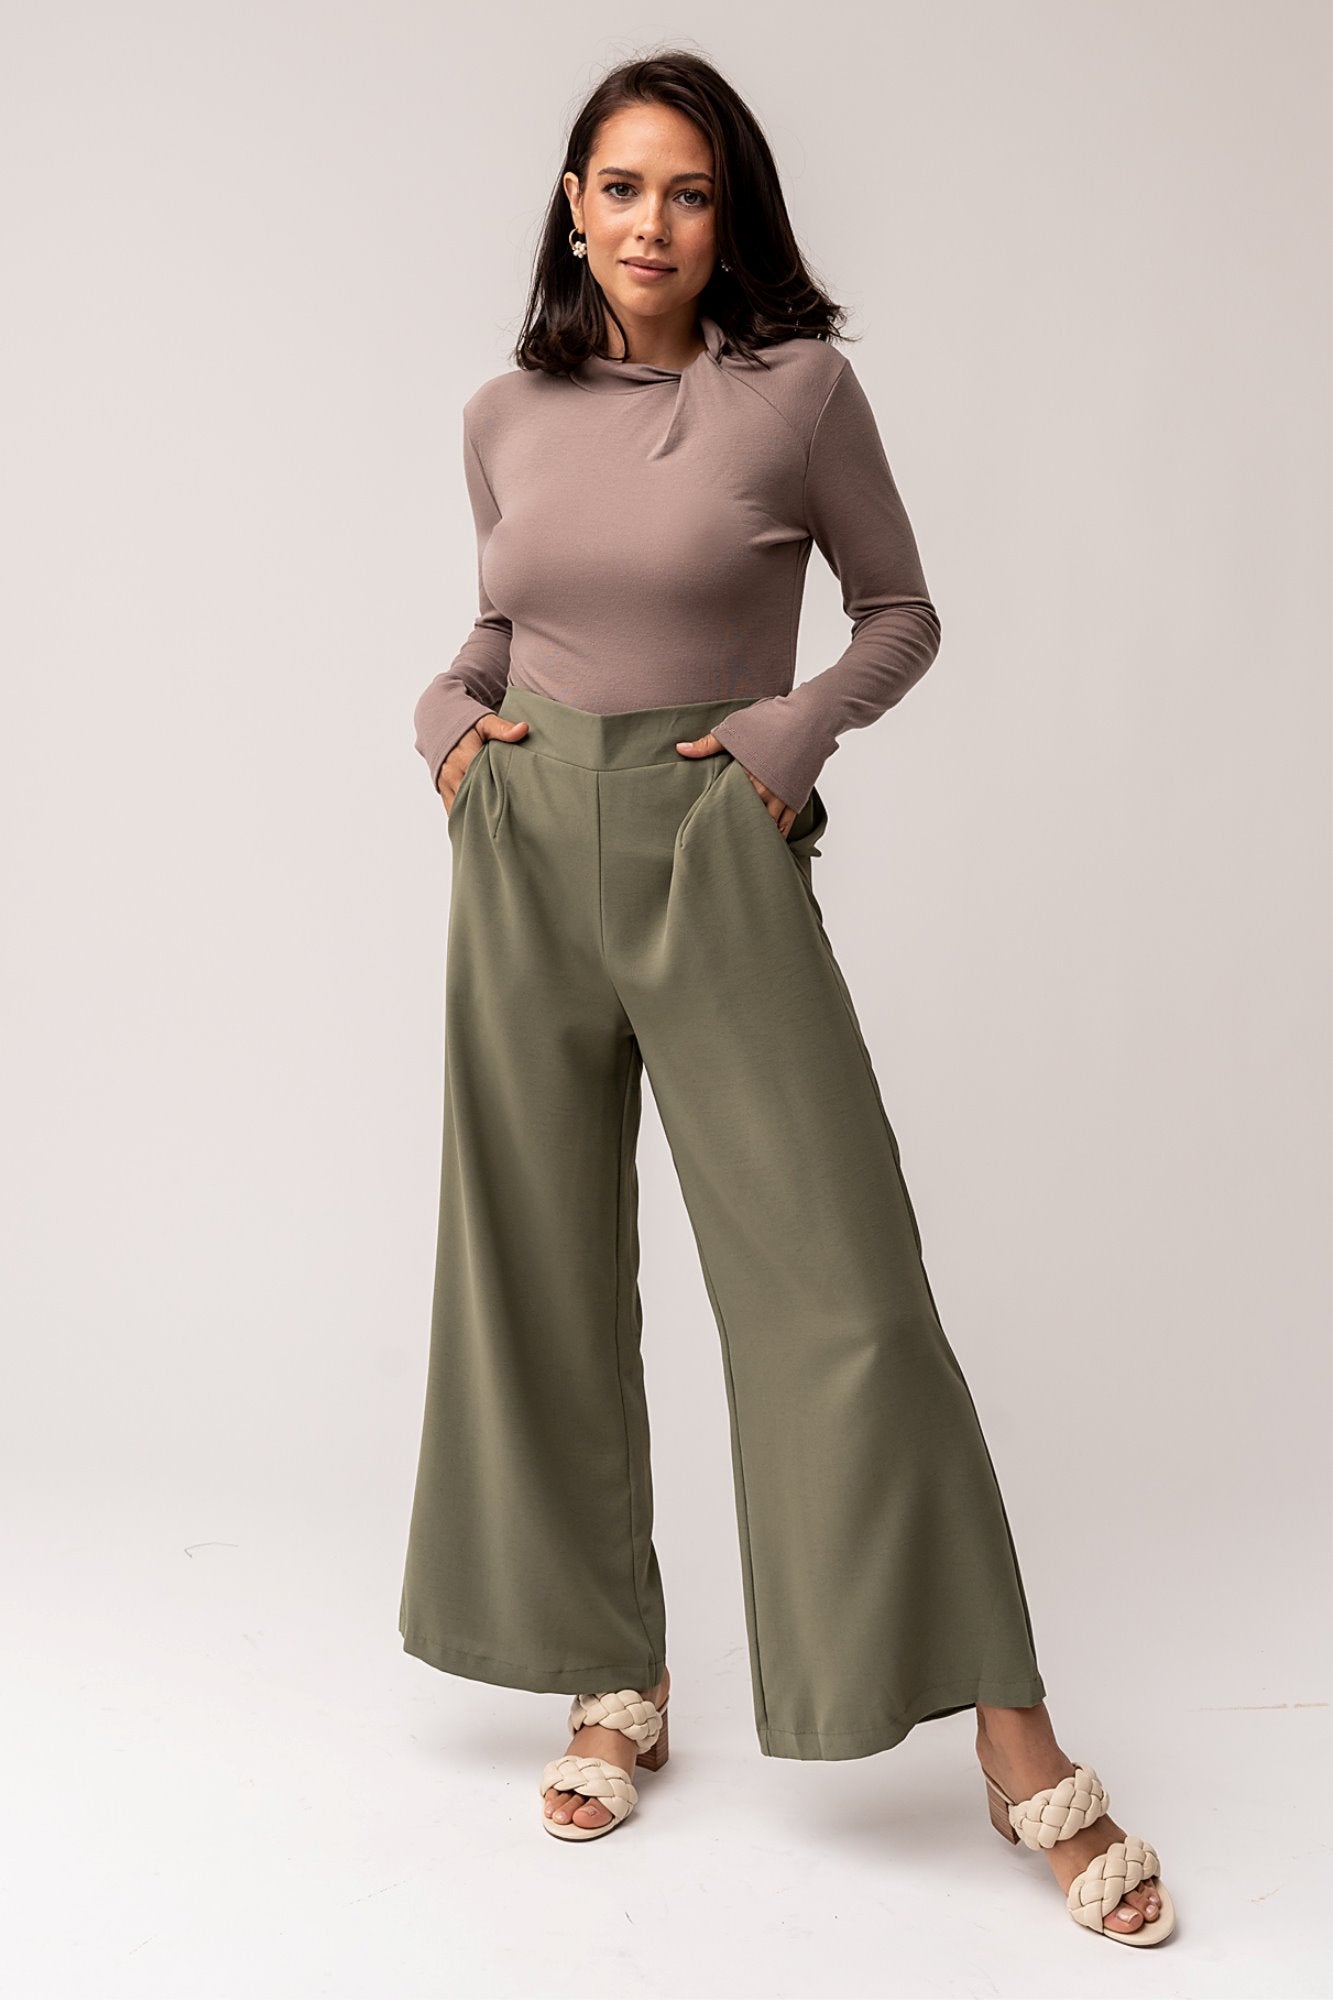 Jovie Pant in Olive Clothing Holley Girl 